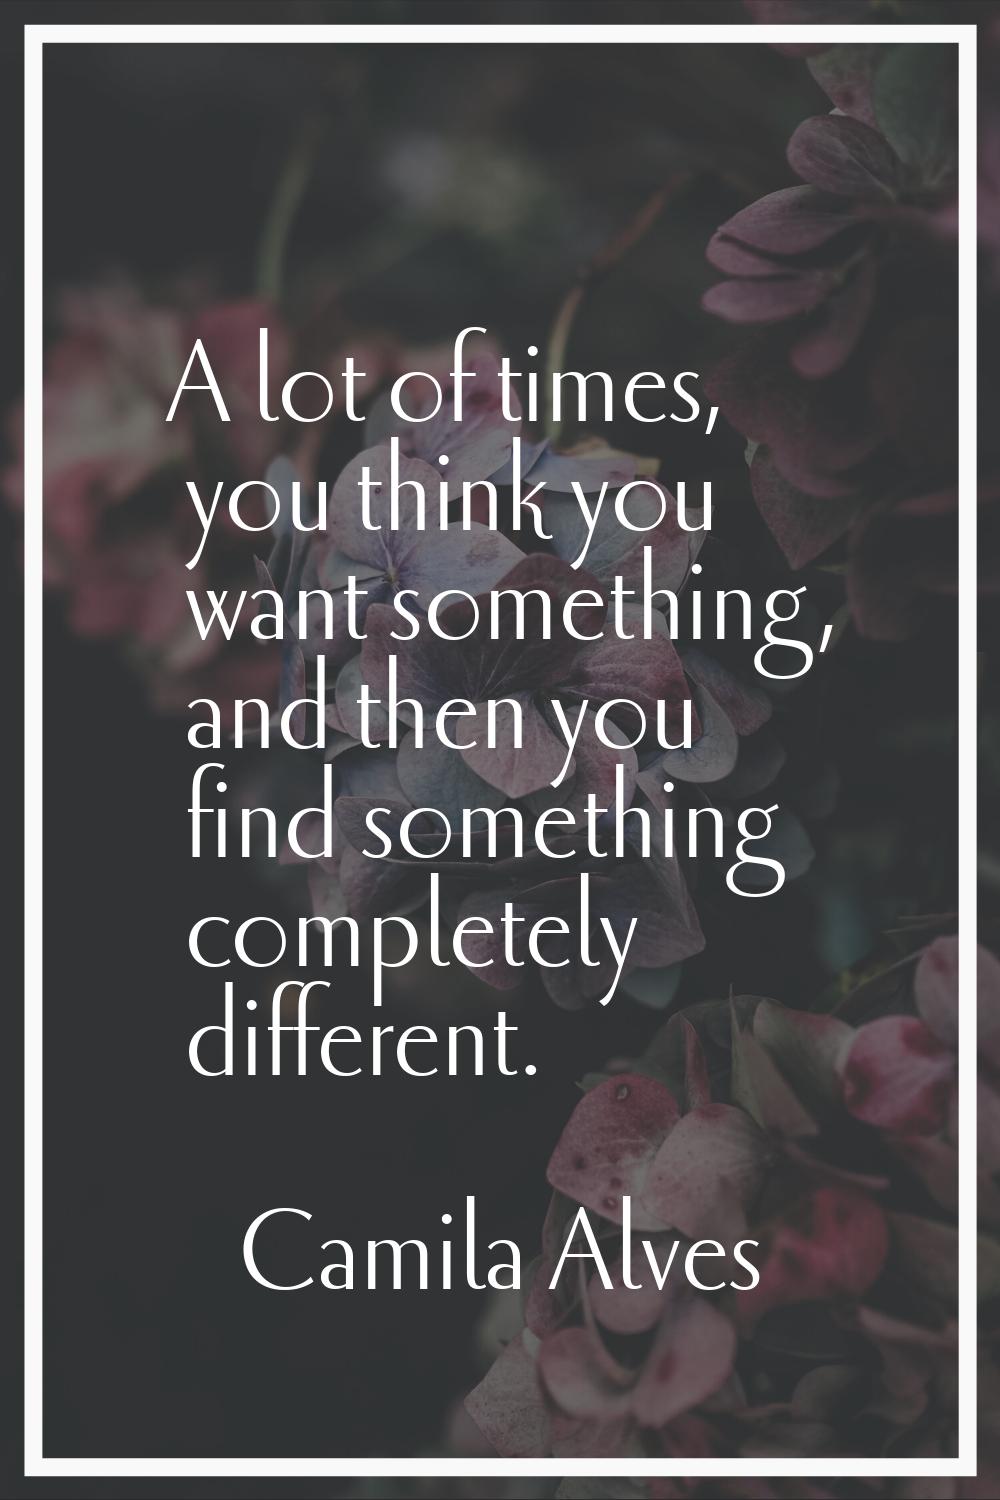 A lot of times, you think you want something, and then you find something completely different.